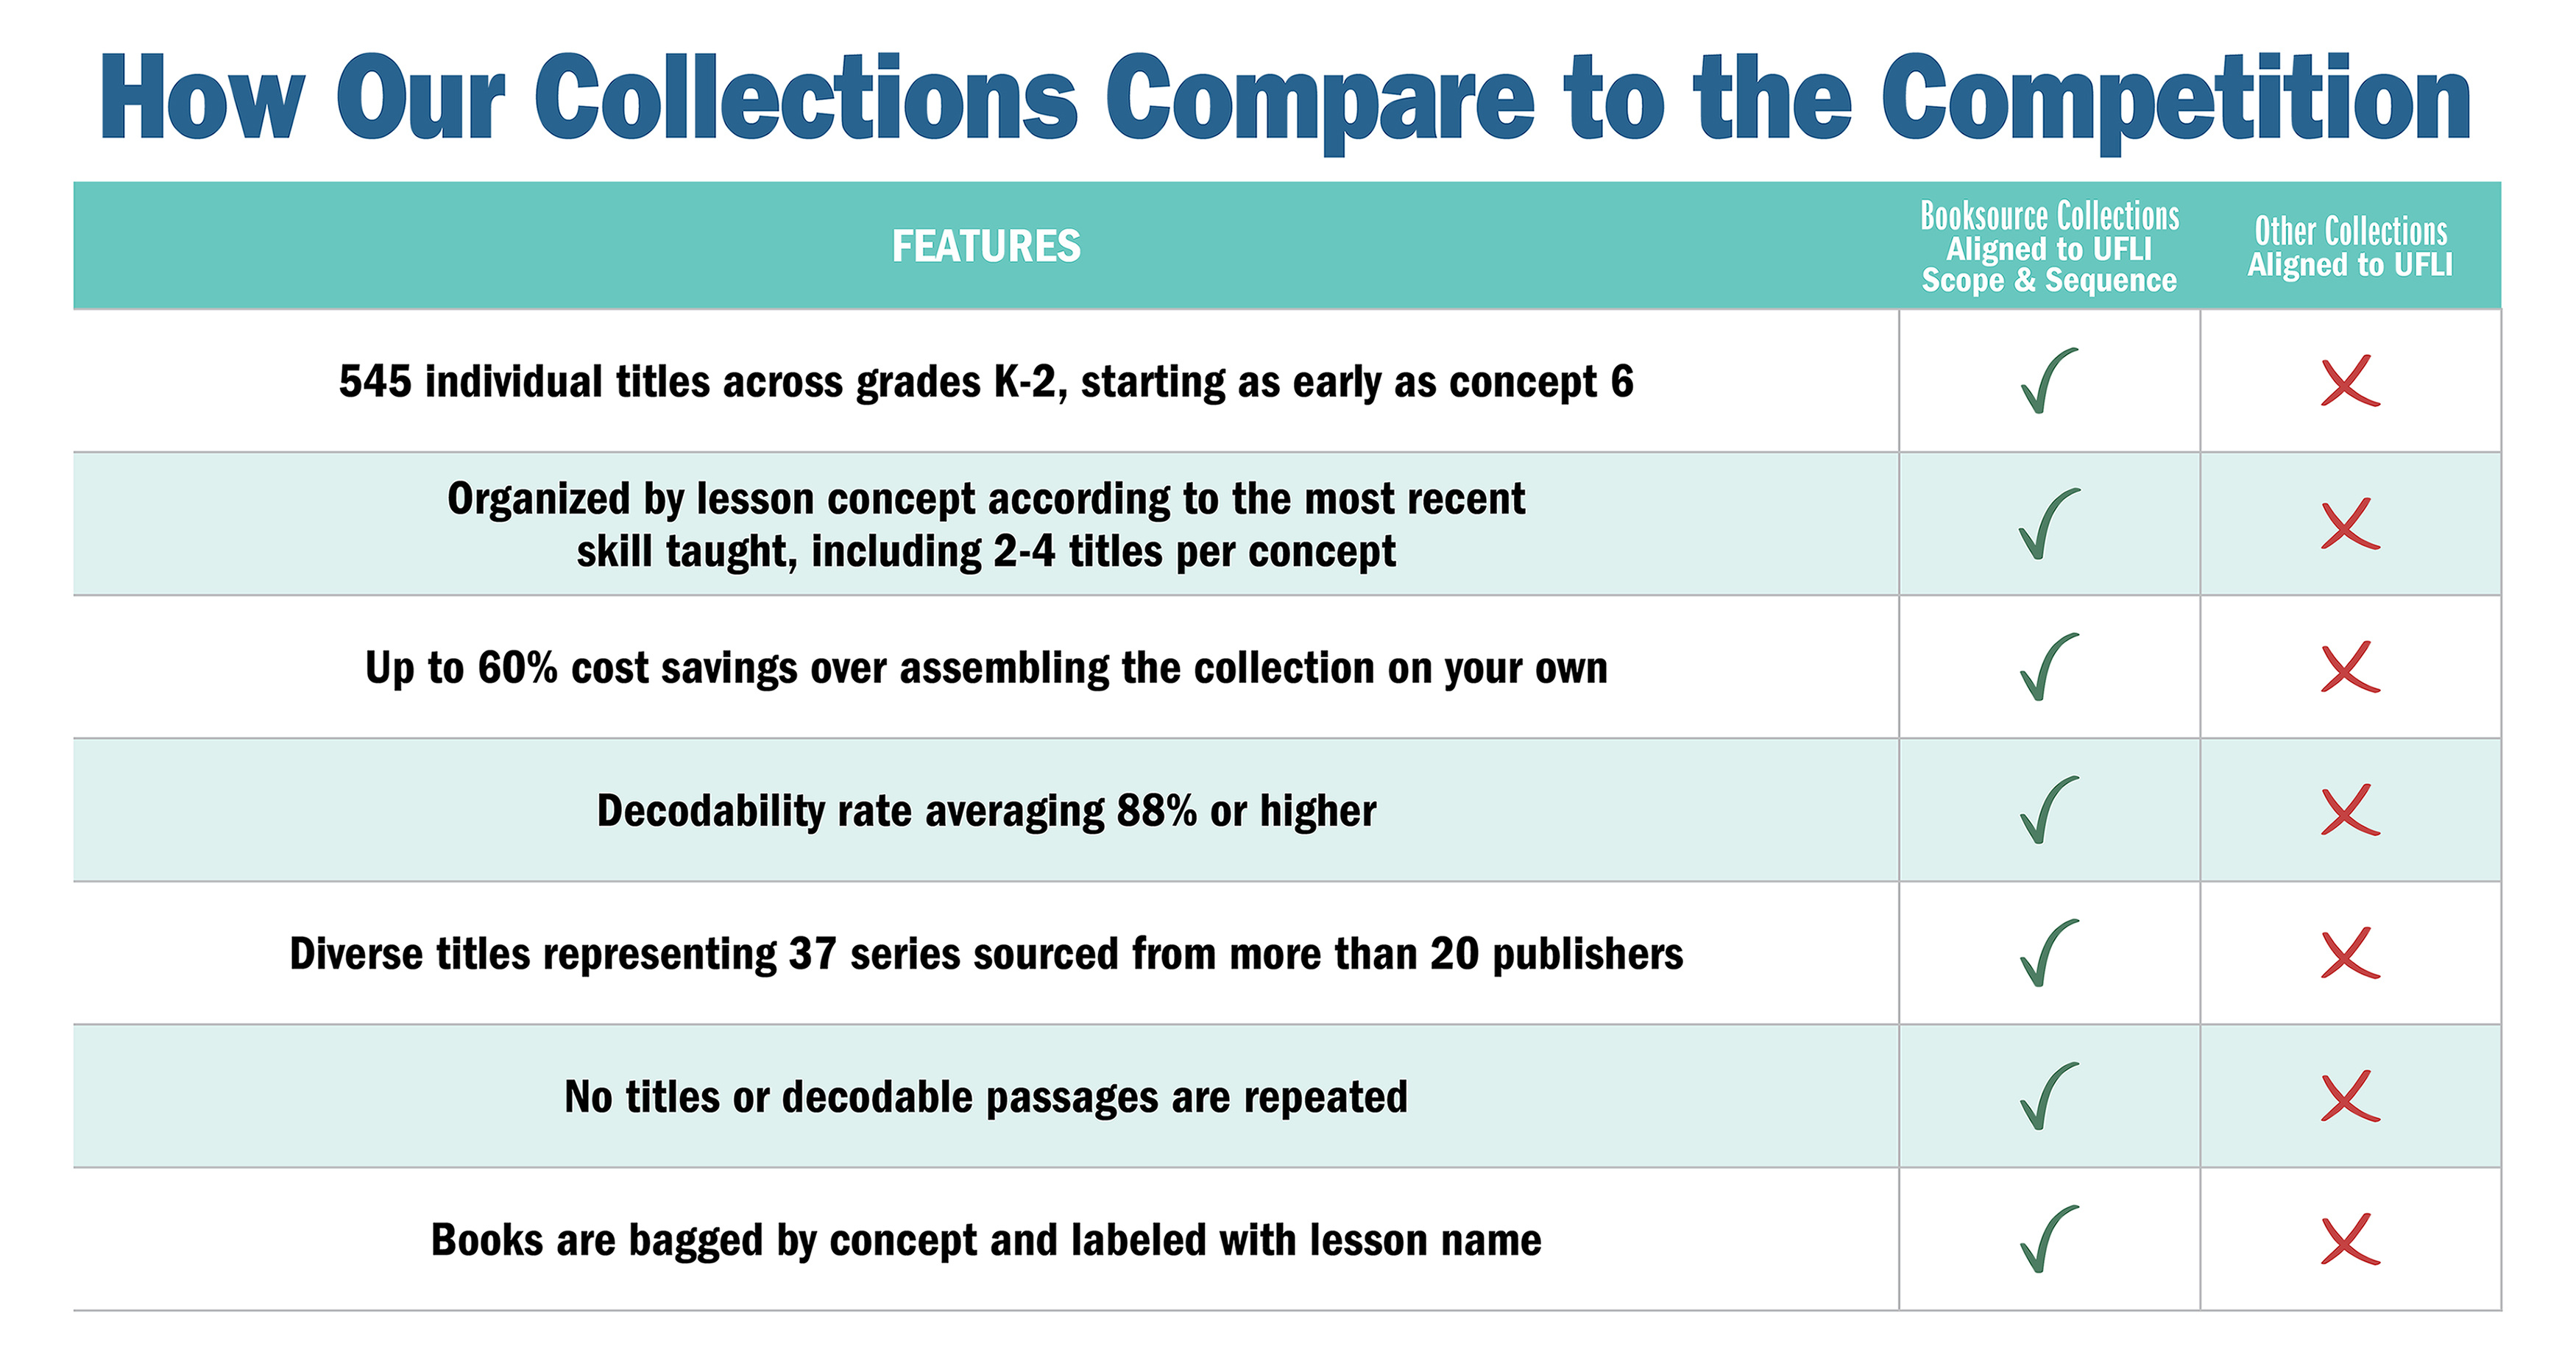 How Our Collections Compare image